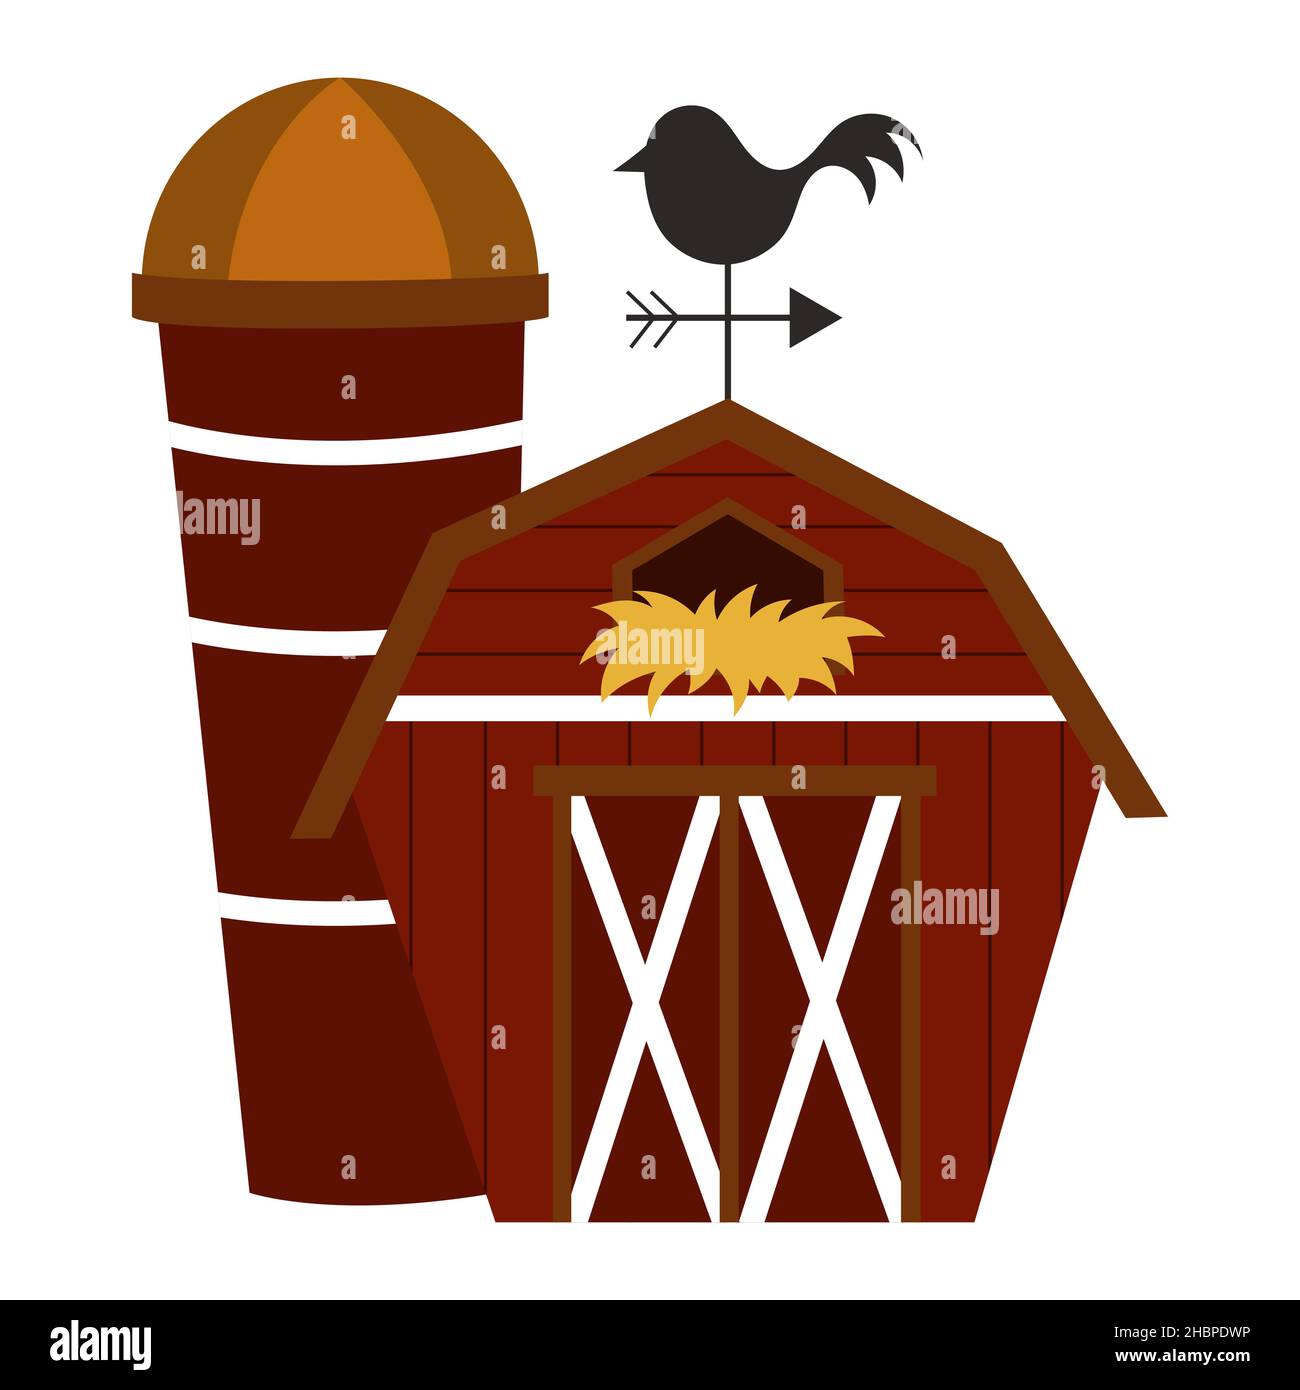 Vector illustration of a barn and a granary. isolated on a white background Stock Vector